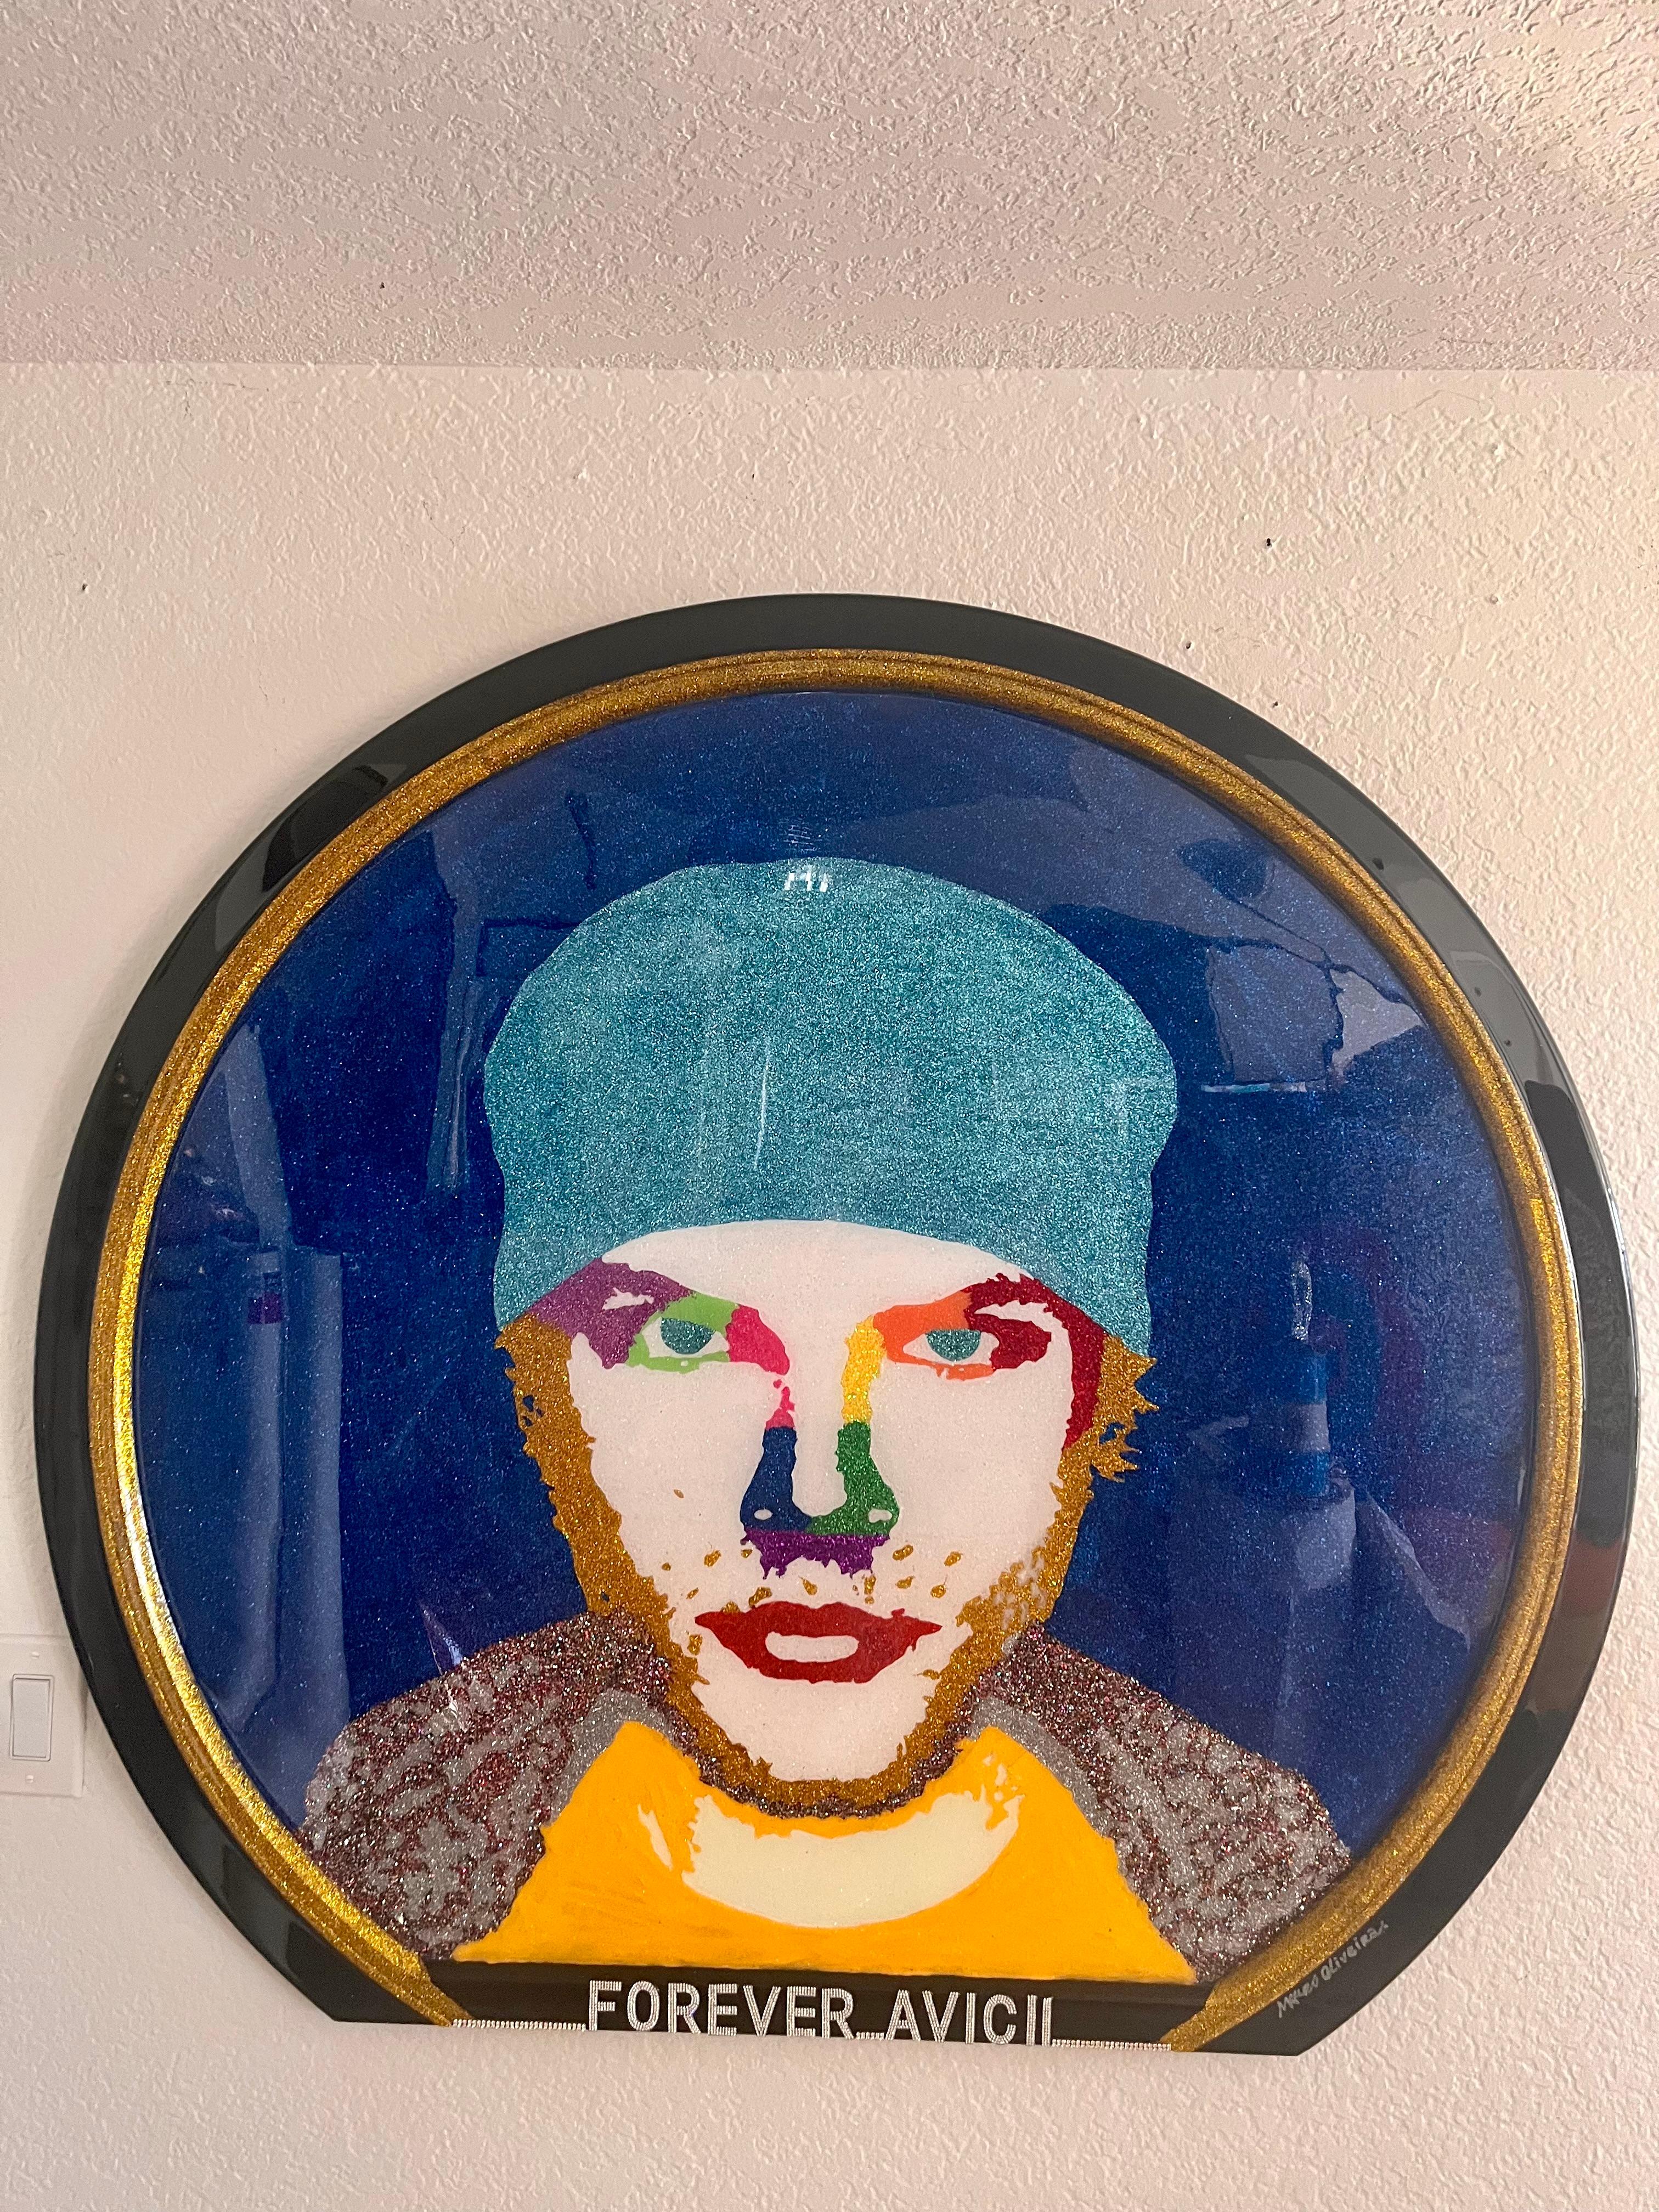 FOREVER AVICII (Original And One Of A Kind Mixed Media Art Masterpiece) For Sale 4